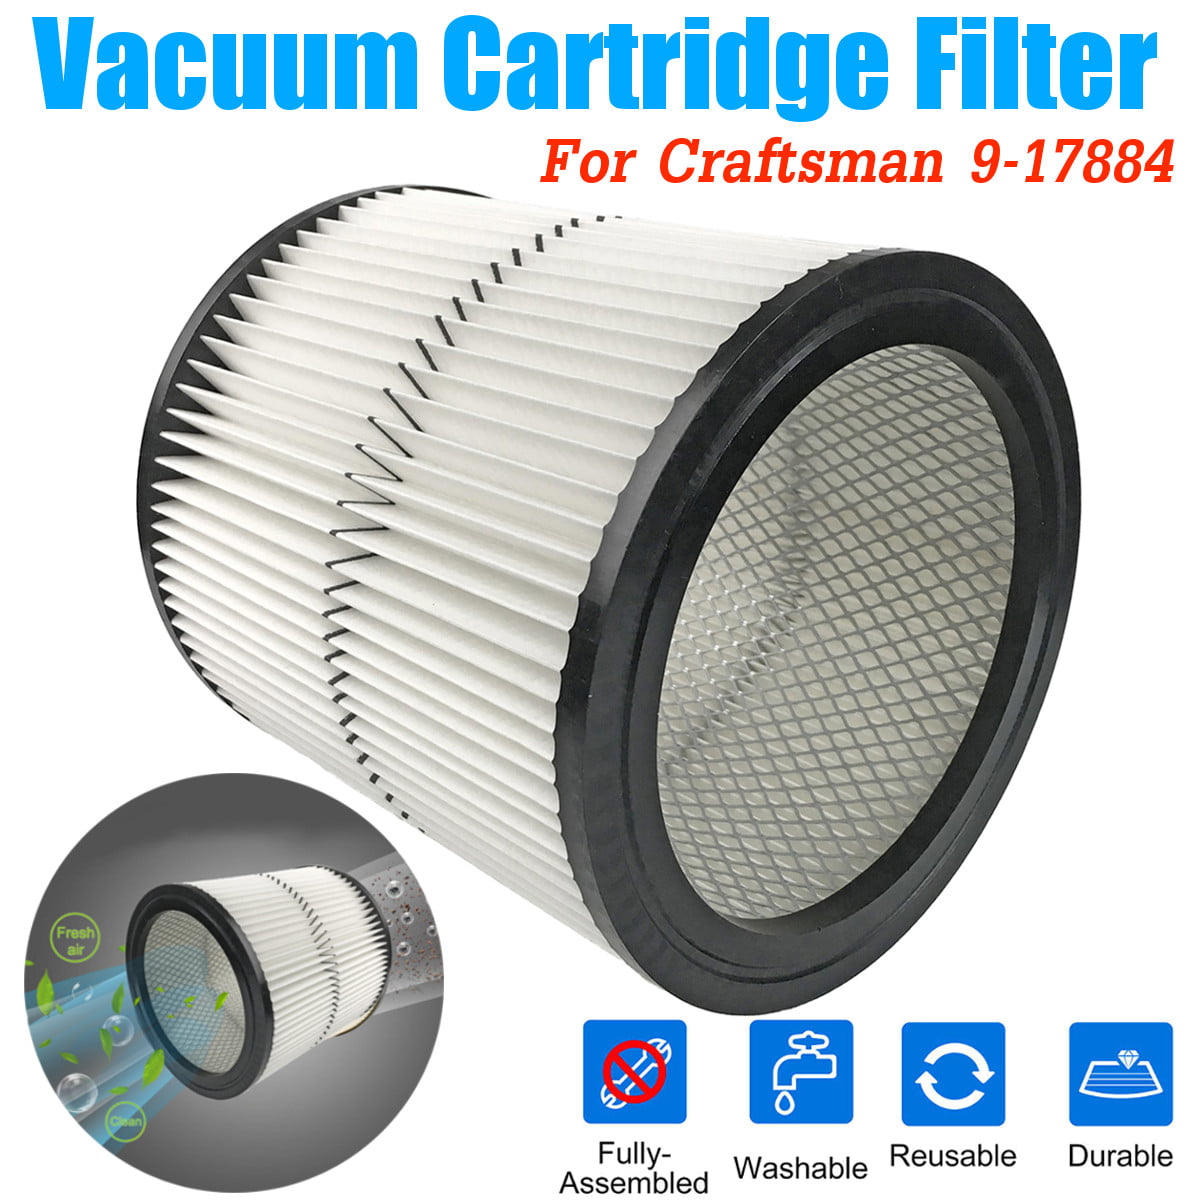 for 6,8,12 and 16 Gallon  Ca For Craftsman 9-17884 Cartridge Shop Vac Filter 